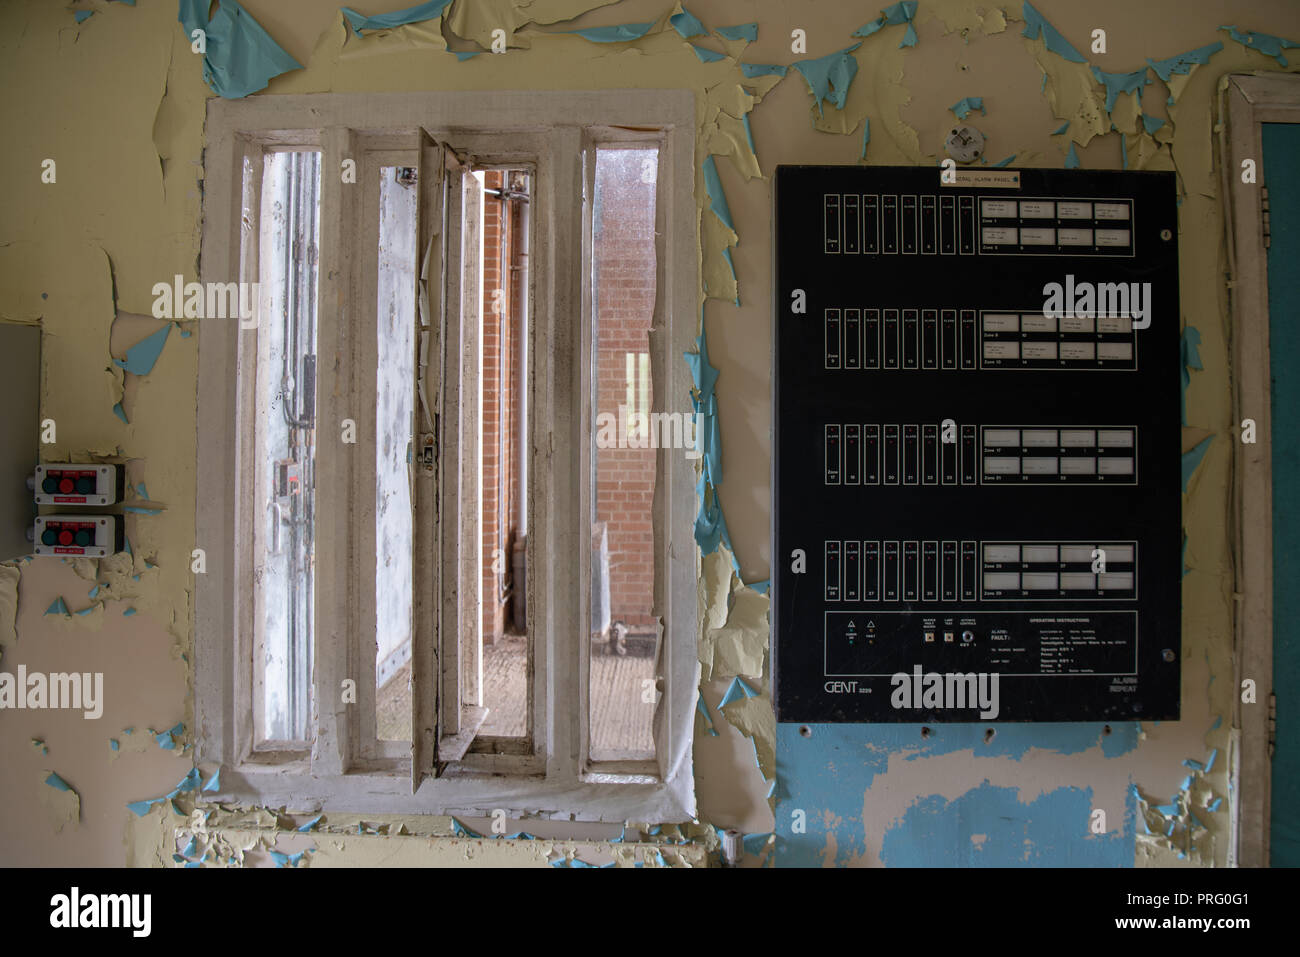 Window inside the guard's entrance to an abandoned prison, with an electrical alarm control panel. Stock Photo